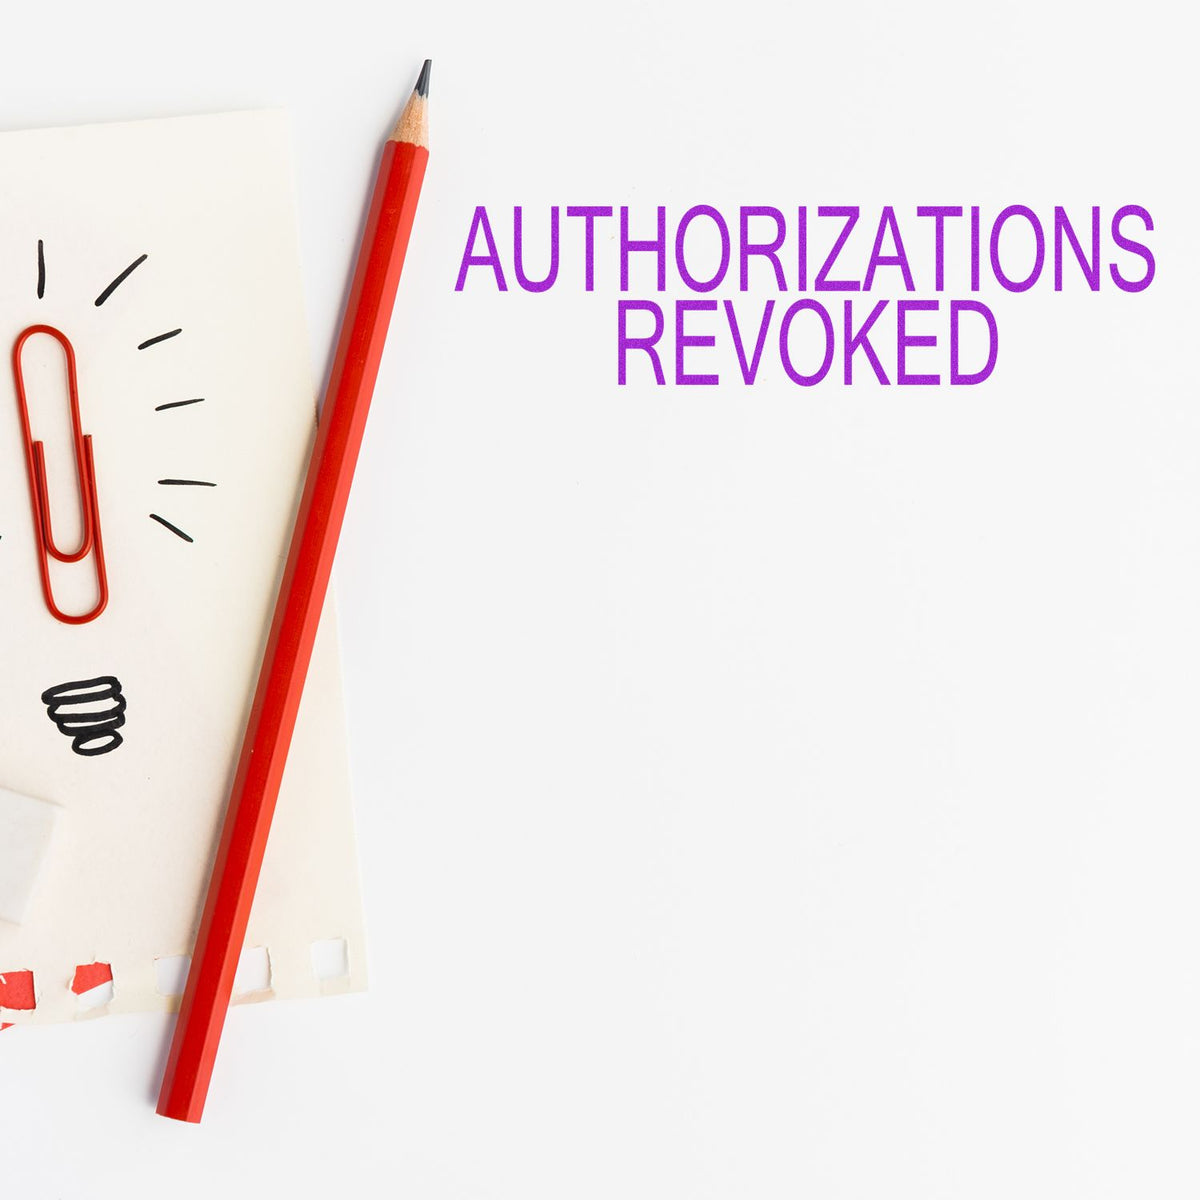 Self-Inking Authorizations Revoked Stamp In Use